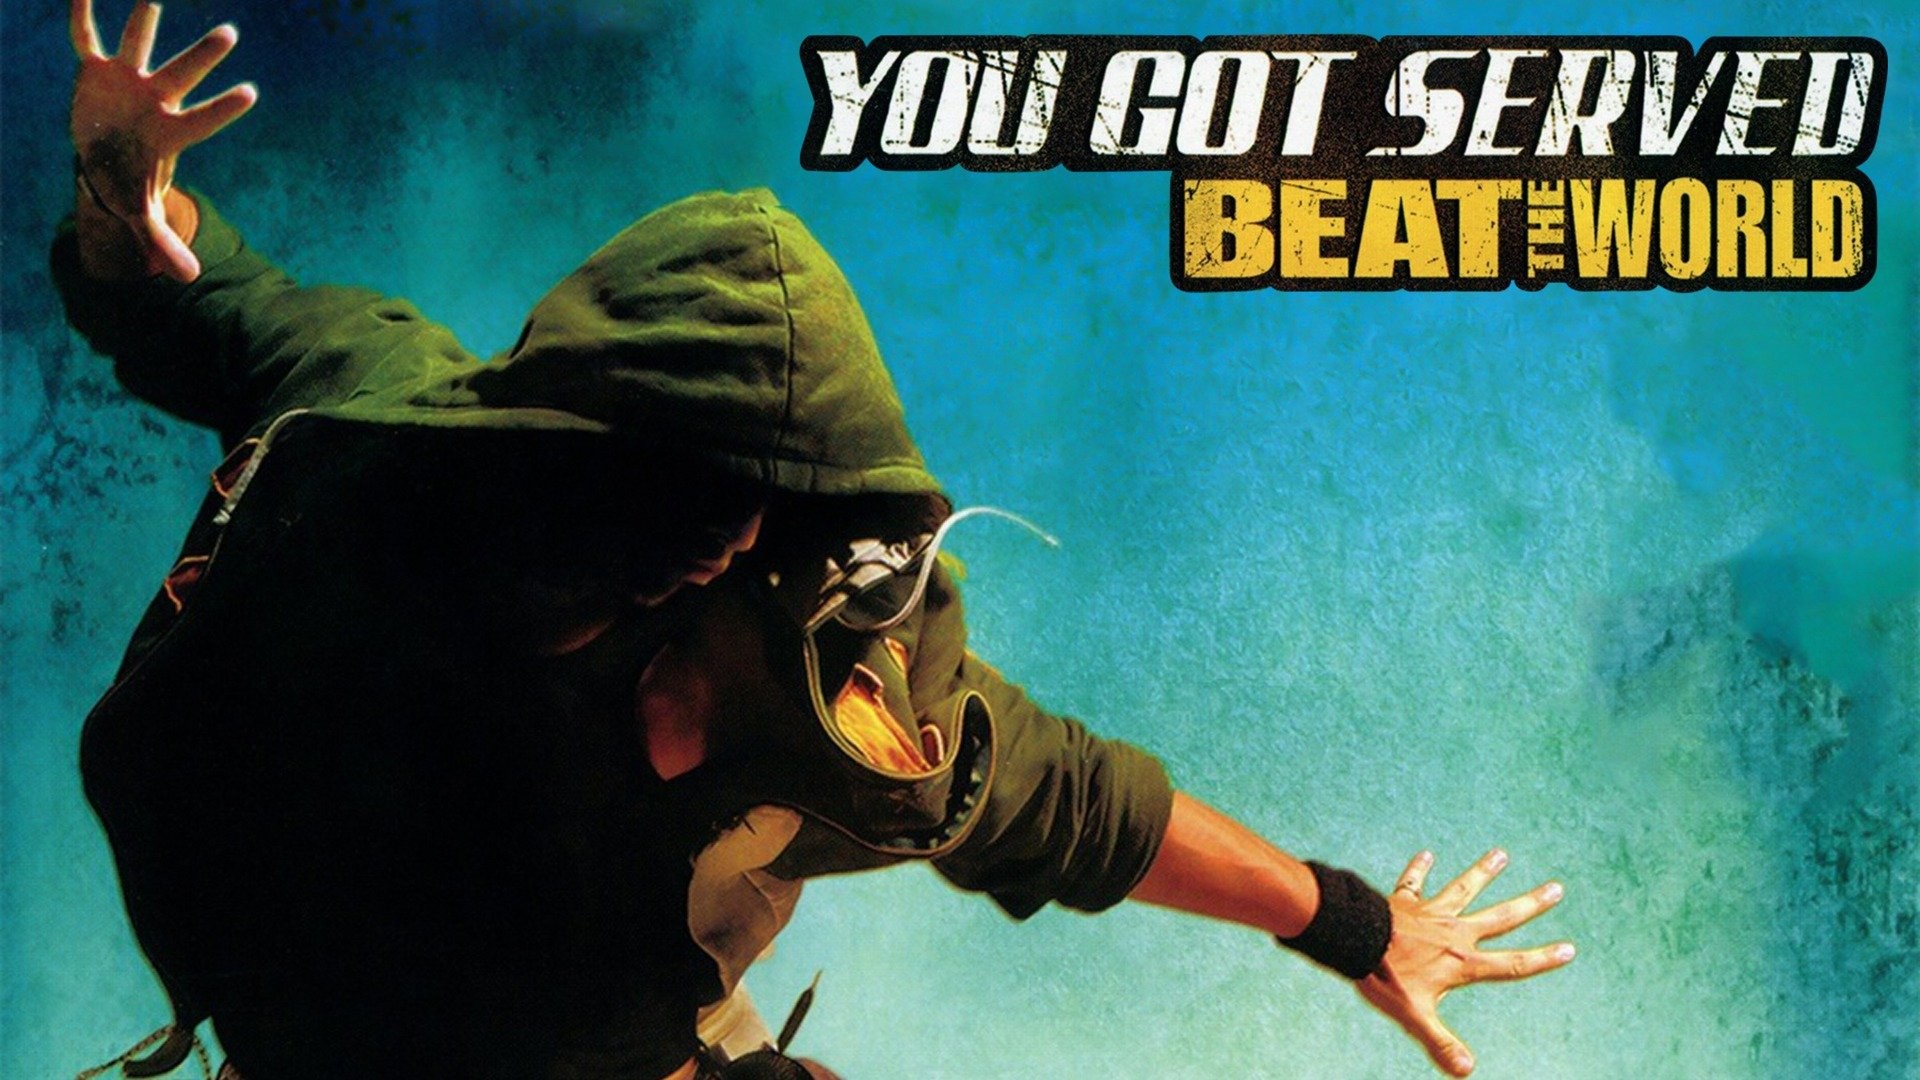 You got served beat the world movie